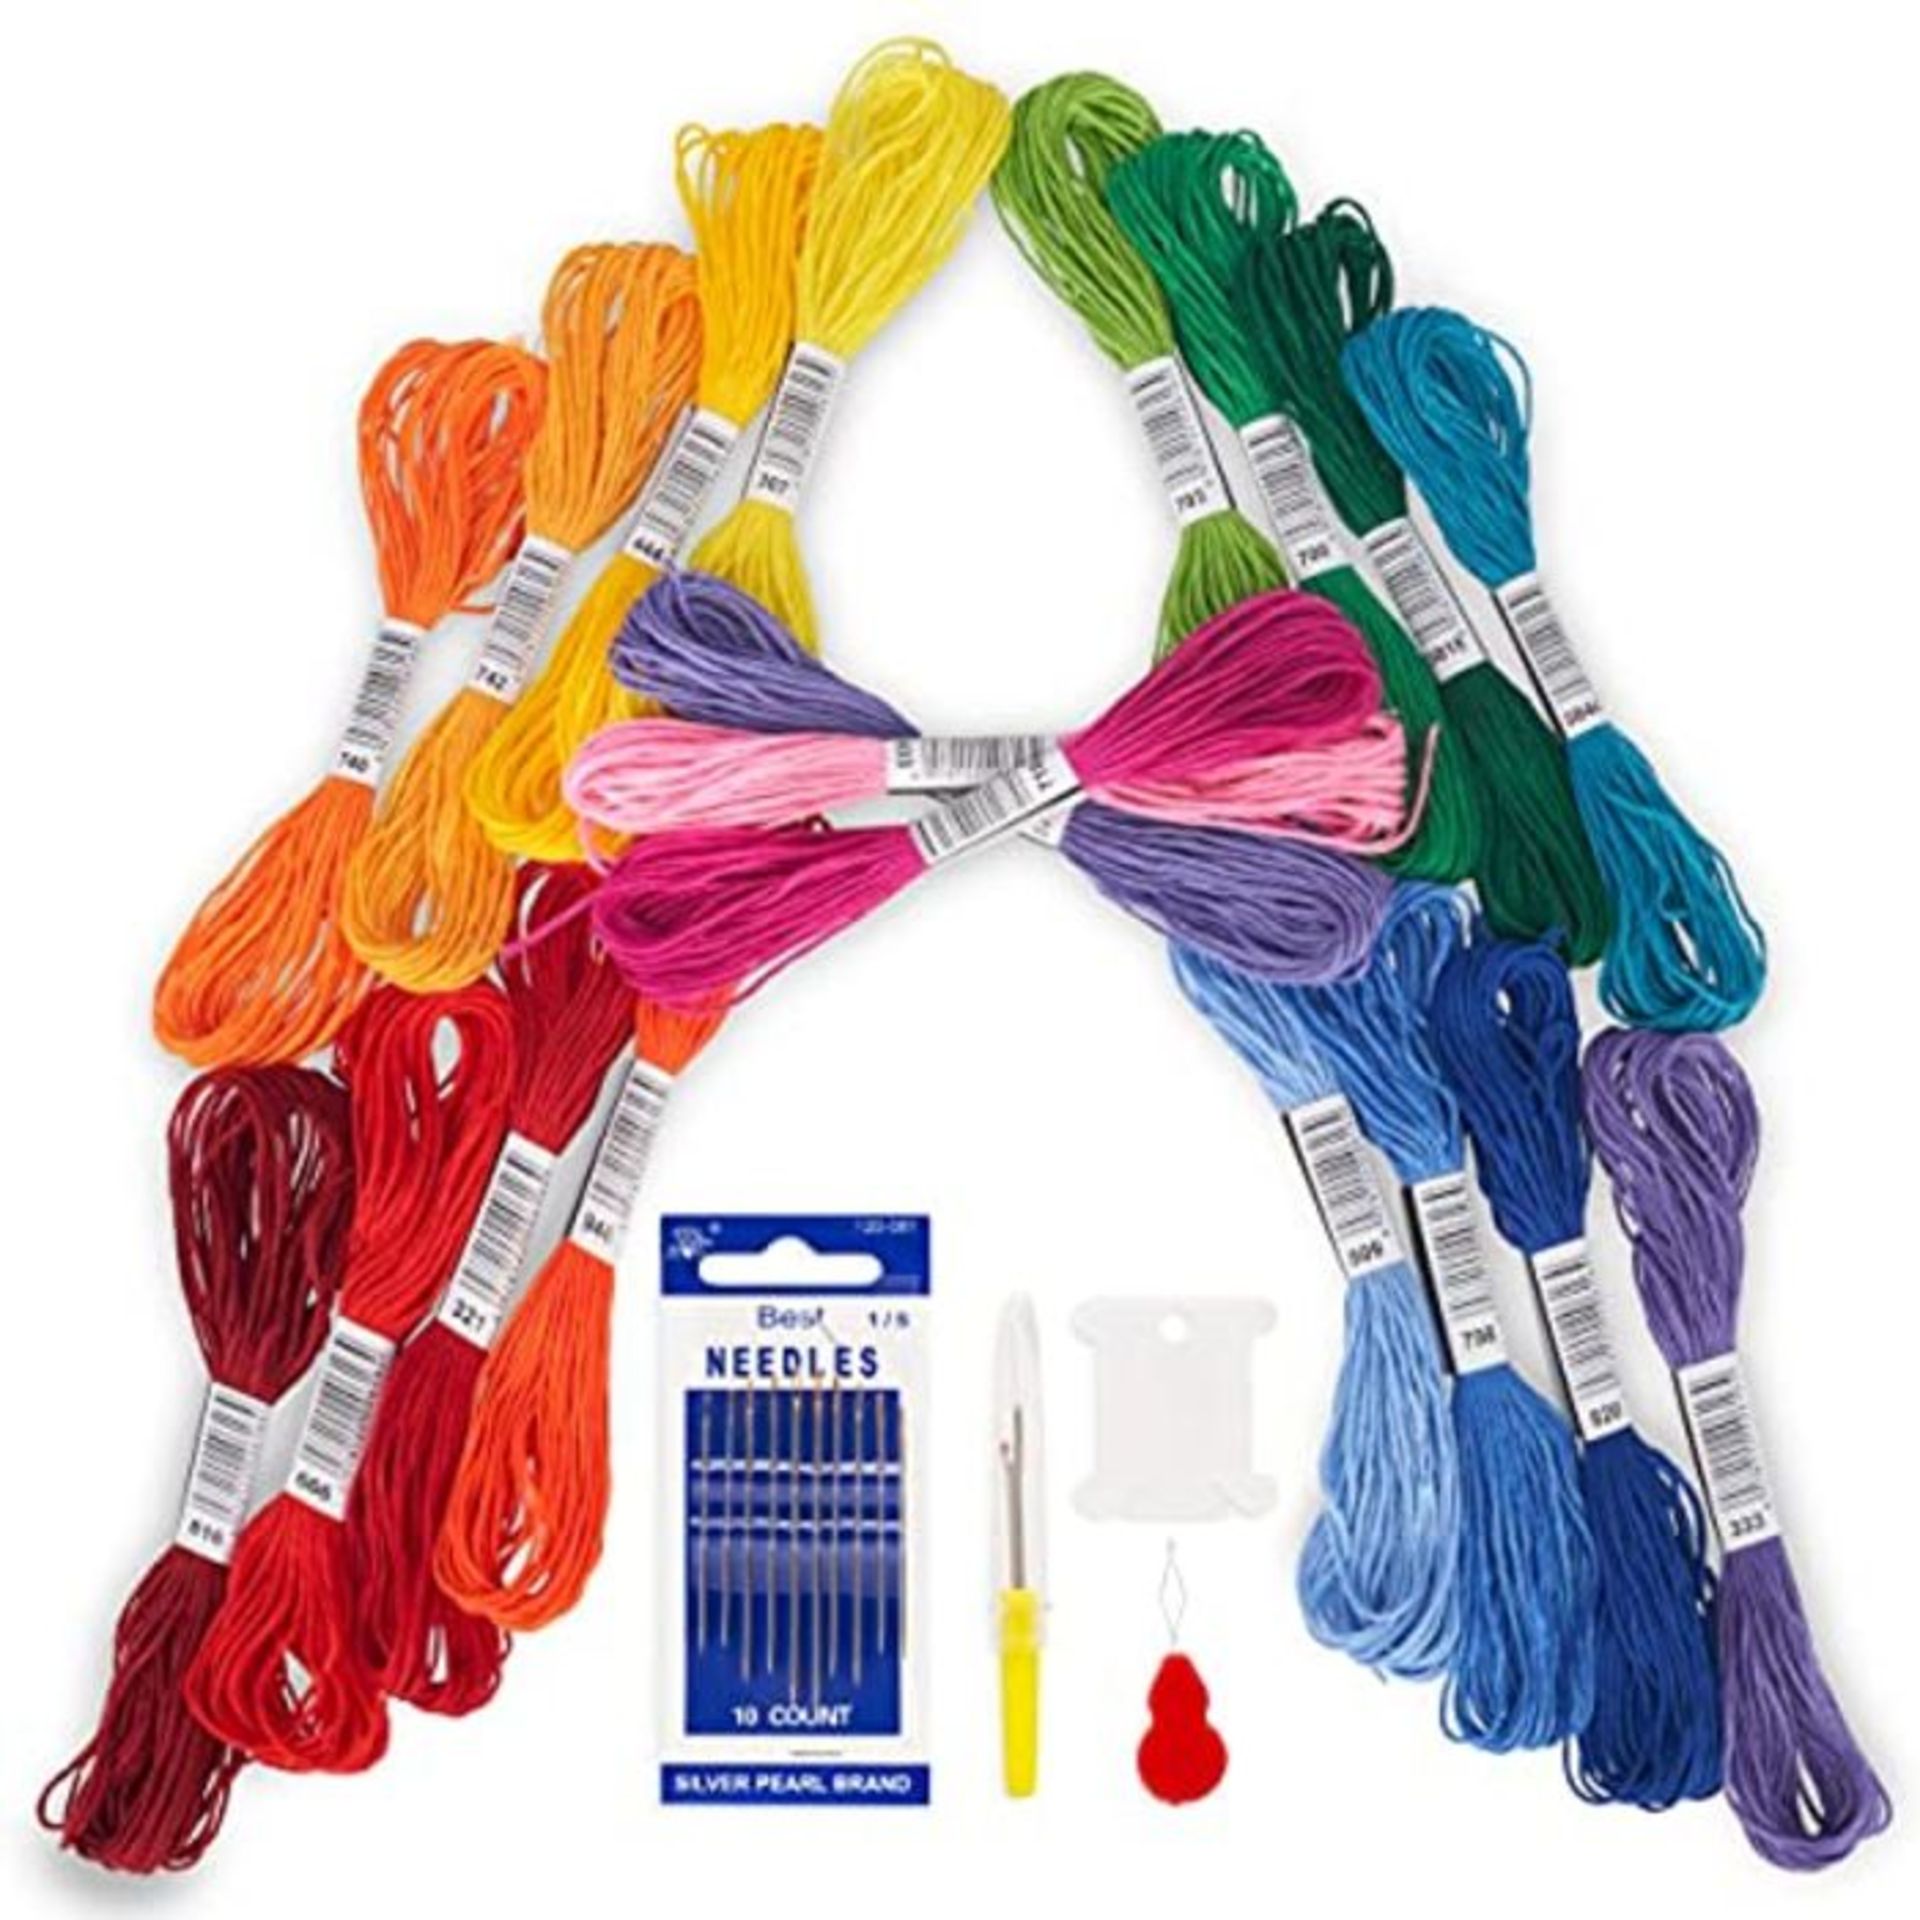 Avenfair Embroidery Threads 100 Skeins per Pack, Multi Color Embroidery Floss, Cross S